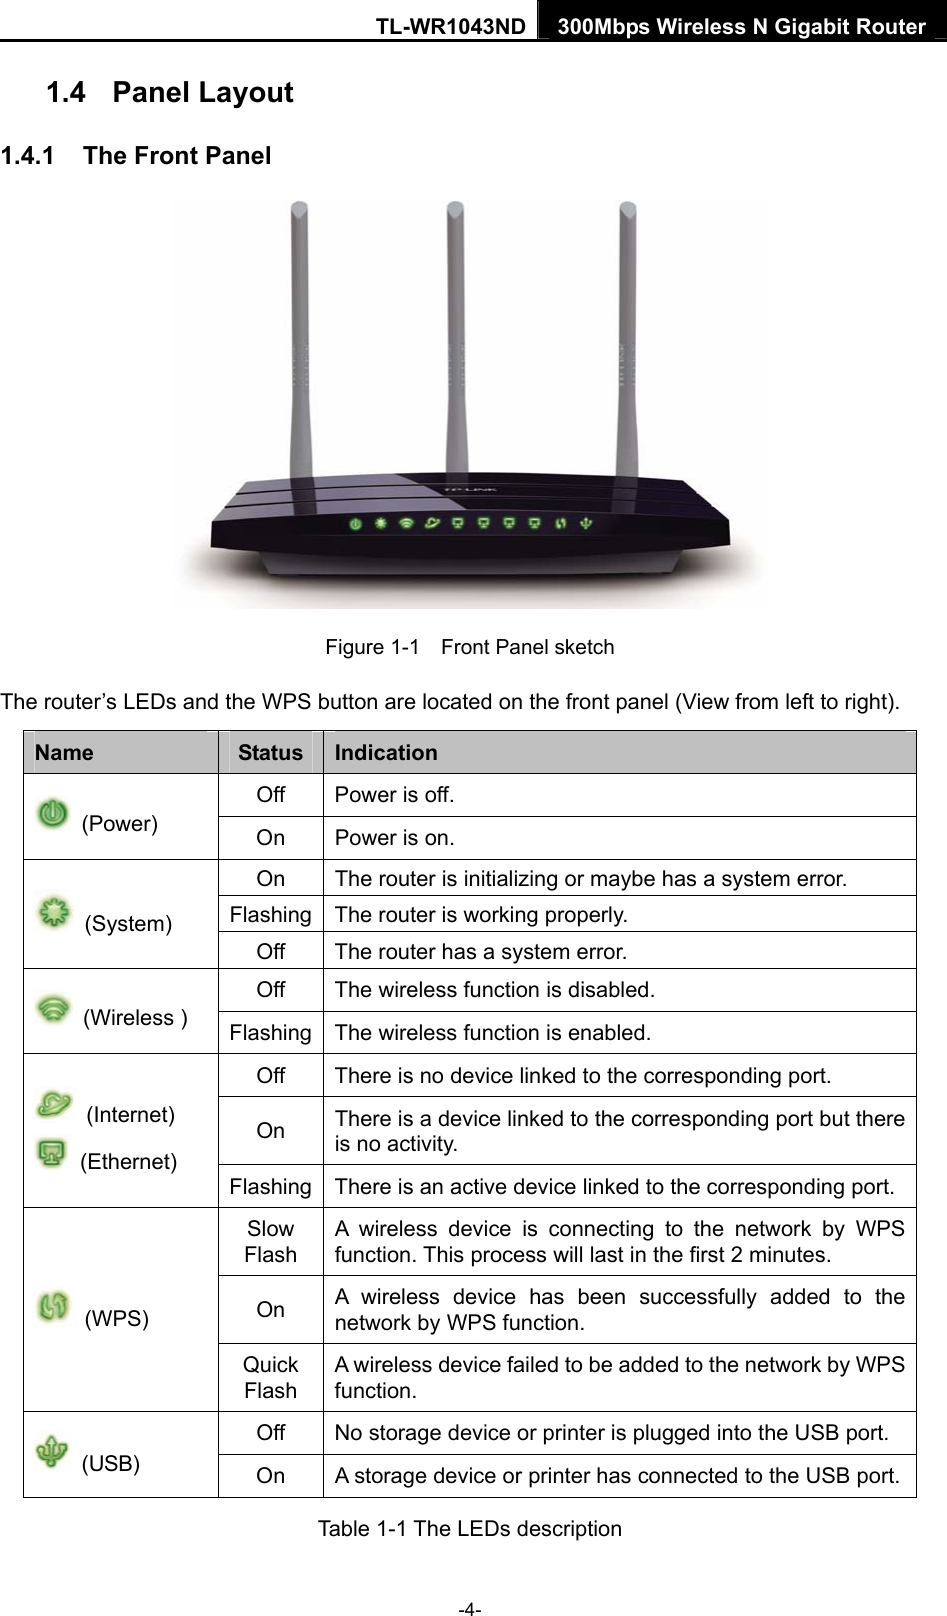 TL-WR1043ND 300Mbps Wireless N Gigabit Router  1.4  Panel Layout 1.4.1  The Front Panel  Figure 1-1    Front Panel sketch The router’s LEDs and the WPS button are located on the front panel (View from left to right).   Name  Status  Indication Off  Power is off.  (Power)  On  Power is on. On  The router is initializing or maybe has a system error. Flashing  The router is working properly.  (System) Off  The router has a system error. Off  The wireless function is disabled.  (Wireless )  Flashing  The wireless function is enabled.   Off  There is no device linked to the corresponding port. On  There is a device linked to the corresponding port but there is no activity.  (Internet)  (Ethernet) Flashing  There is an active device linked to the corresponding port. Slow Flash A wireless device is connecting to the network by WPS function. This process will last in the first 2 minutes. On  A wireless device has been successfully added to the network by WPS function.    (WPS) Quick Flash A wireless device failed to be added to the network by WPS function. Off  No storage device or printer is plugged into the USB port.  (USB)  On  A storage device or printer has connected to the USB port. Table 1-1 The LEDs description -4- 